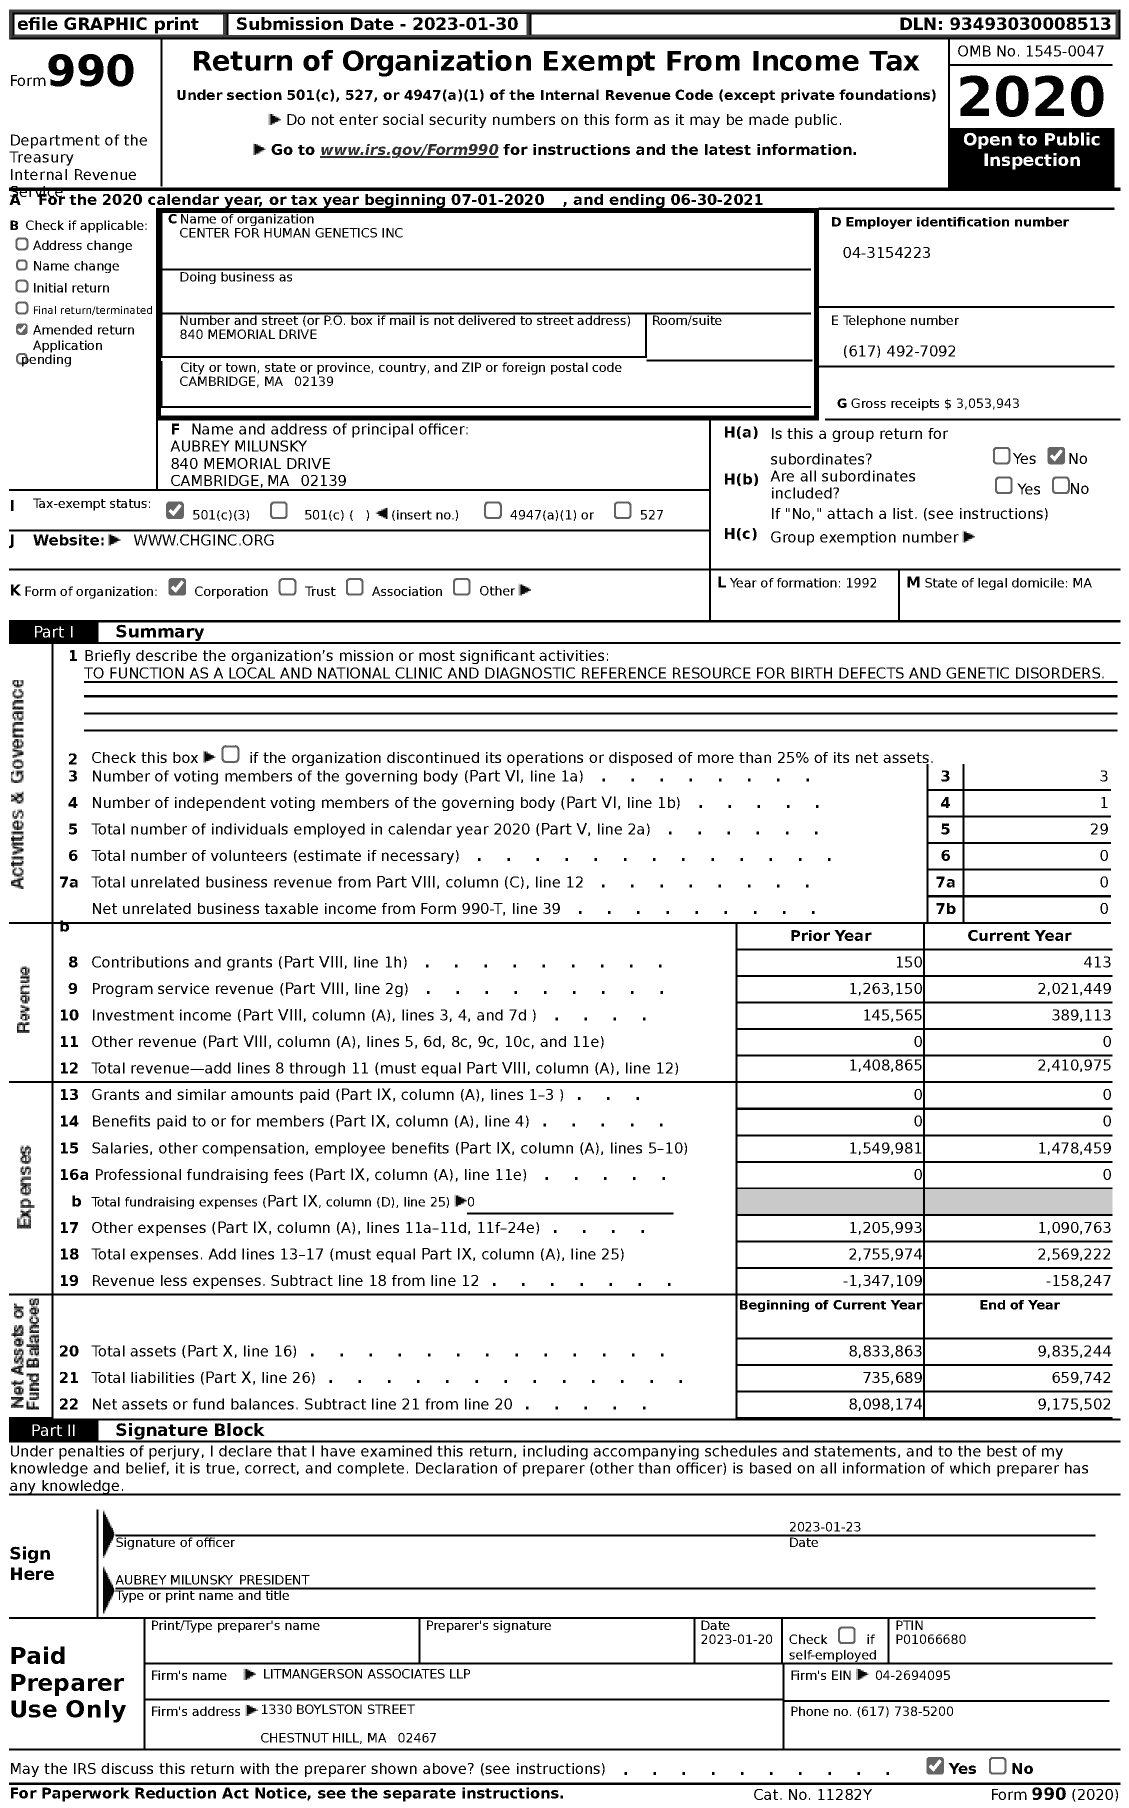 Image of first page of 2020 Form 990 for Center for Human Genetics (CHG)